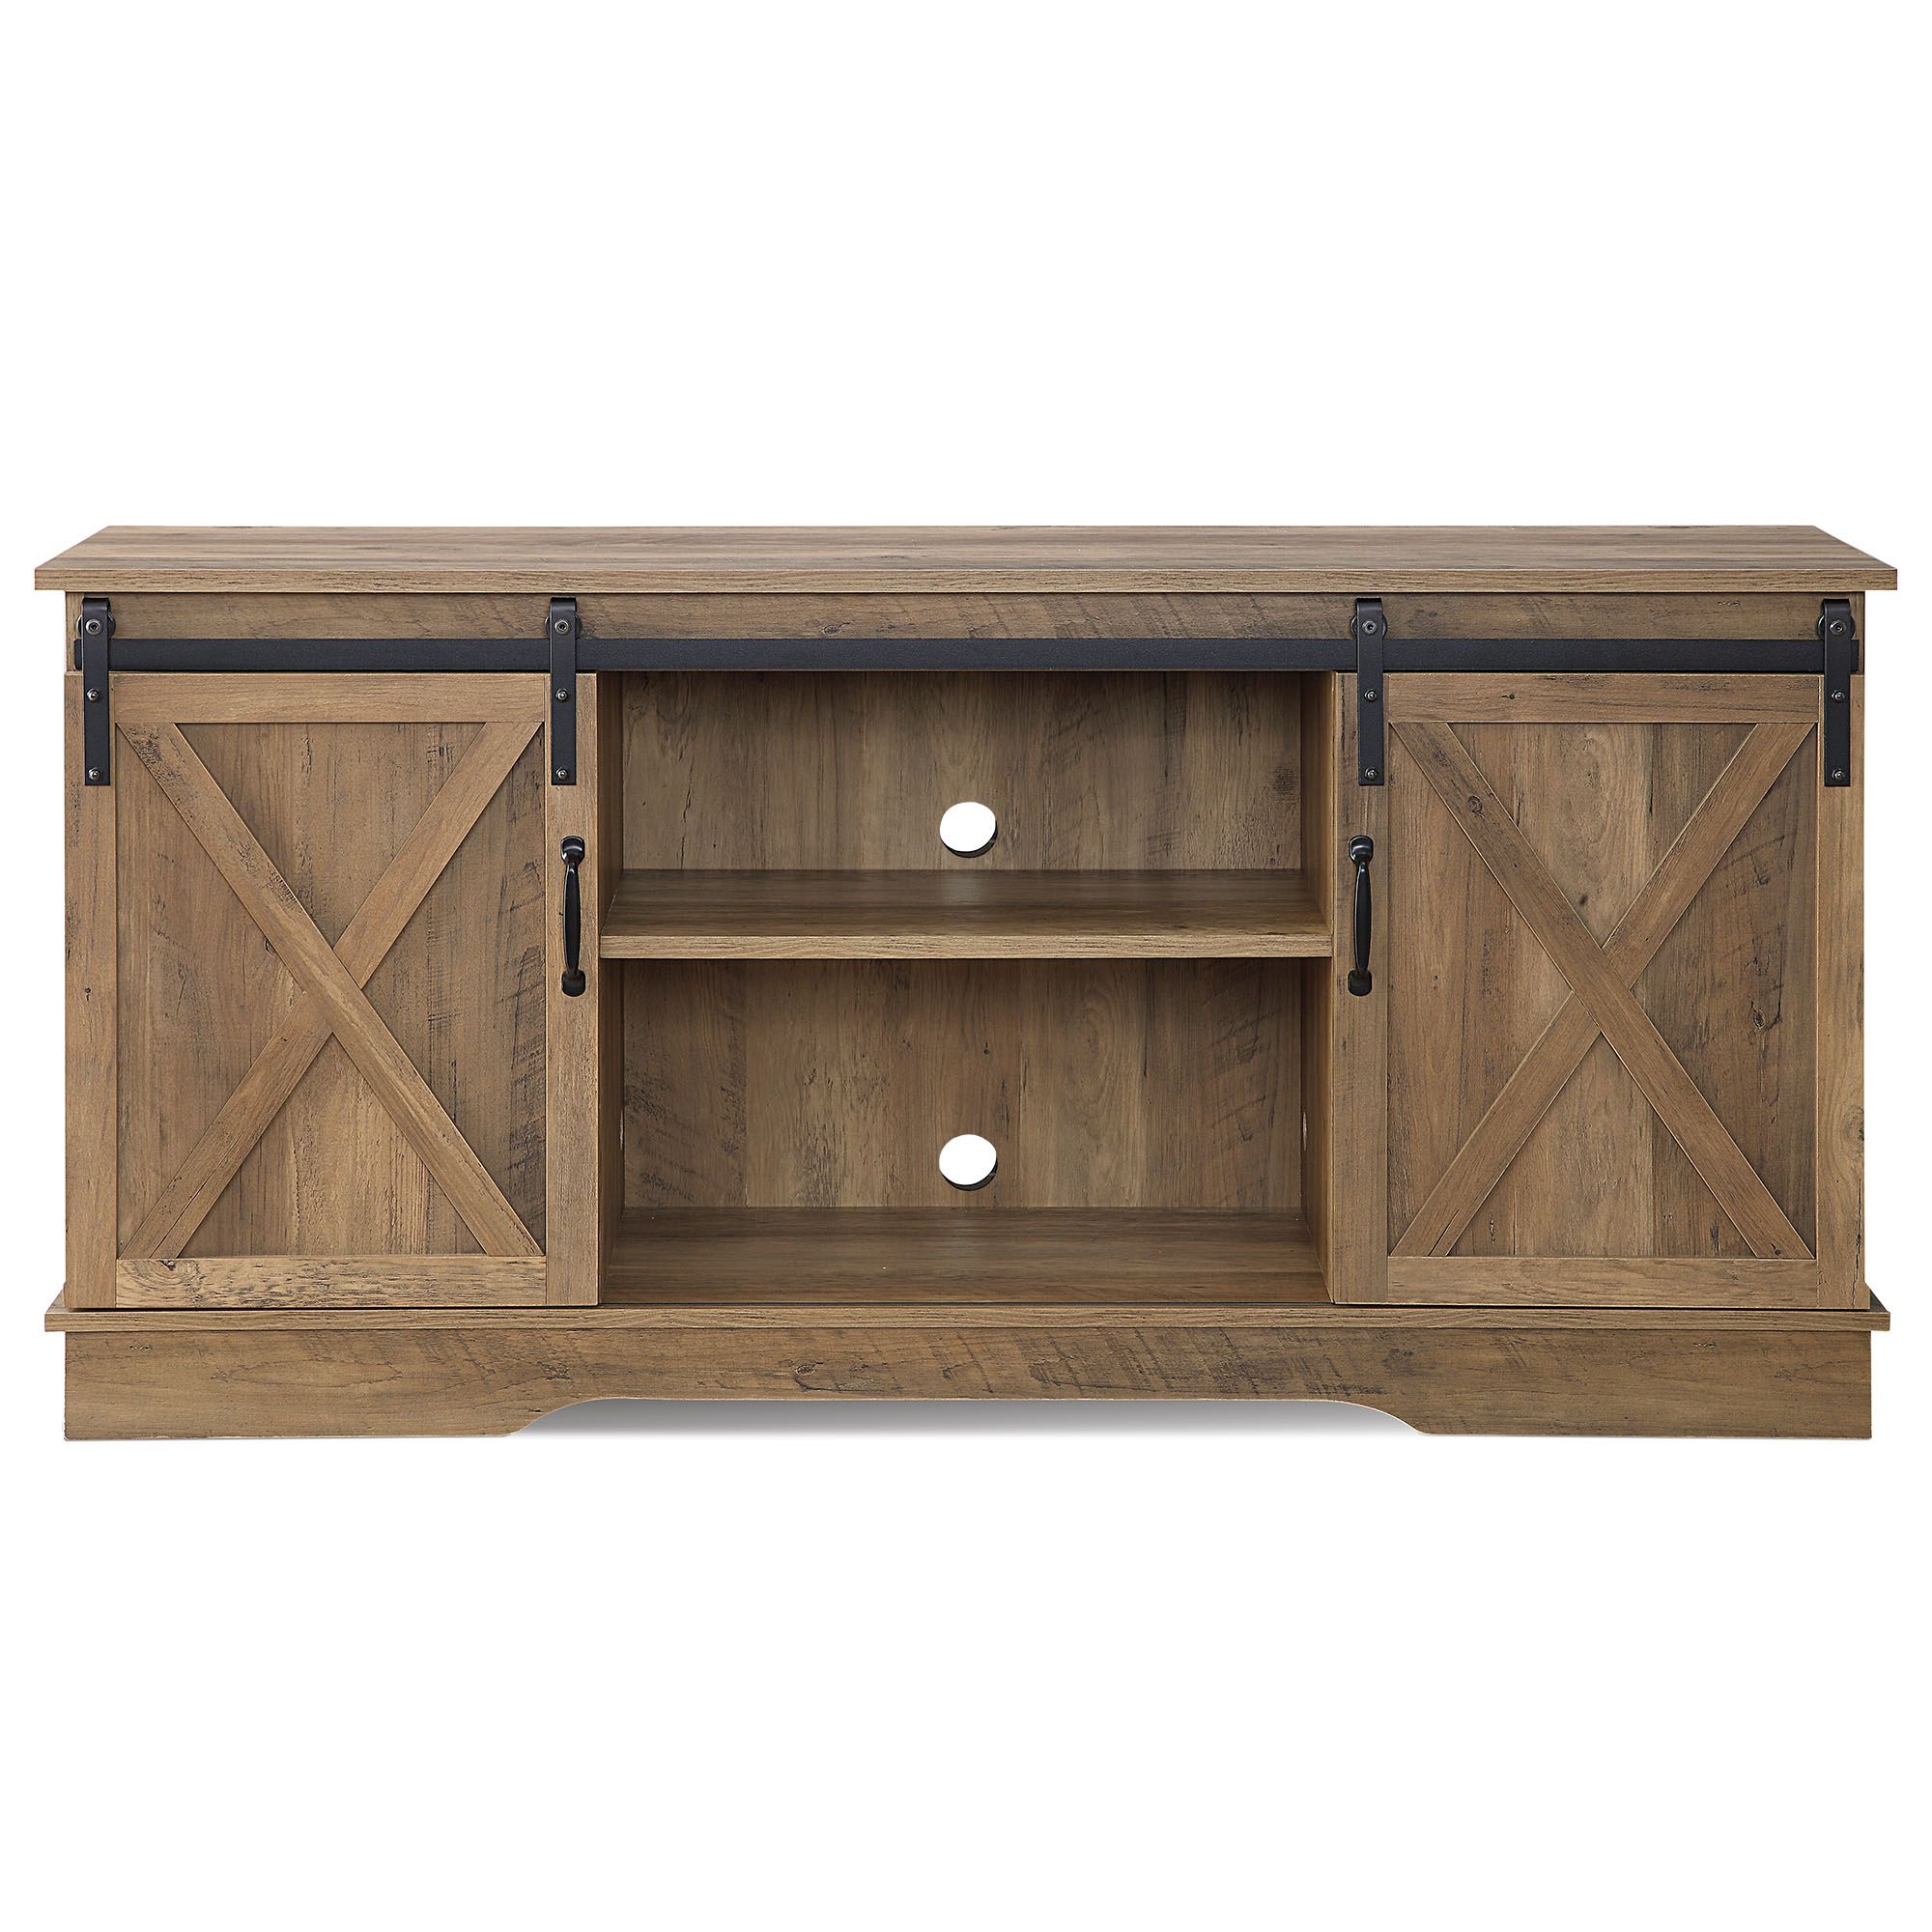 58"farmhouse Tv Stand W/sliding Door Console Table For Tvs Regarding Modern Sliding Door Tv Stands (View 10 of 20)